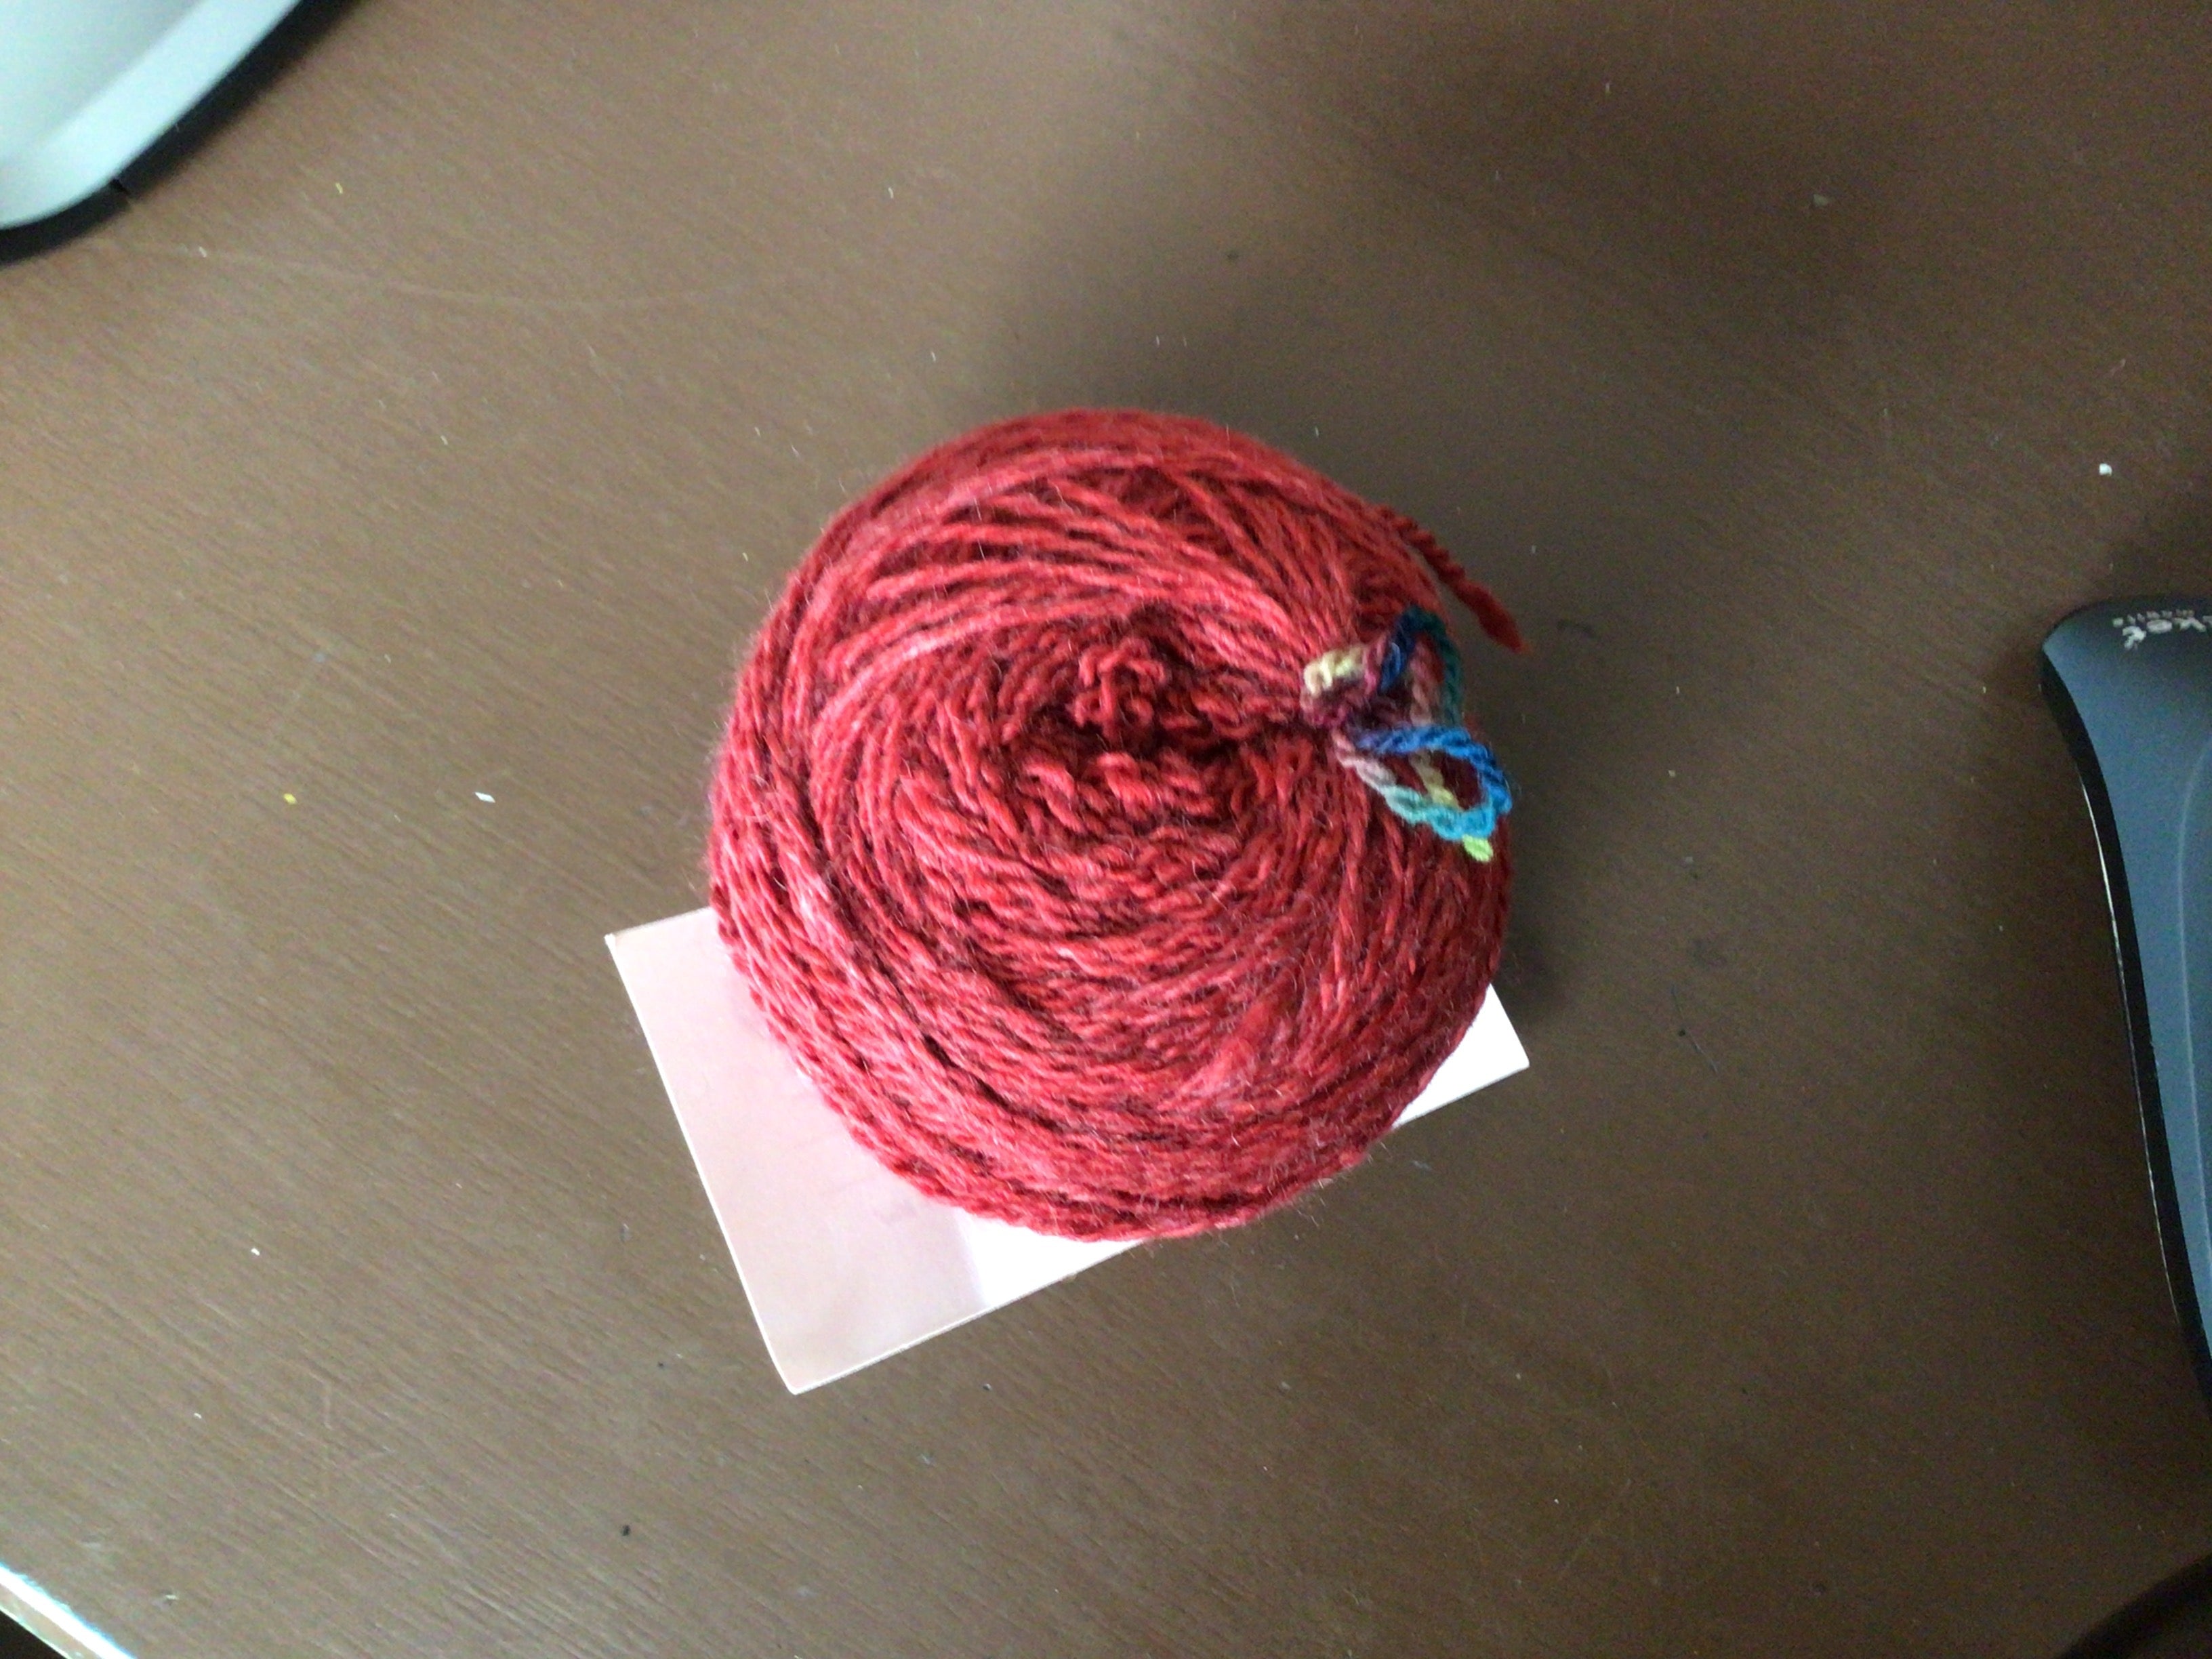 Tronstad Ranch Rambouillet 2 Ply Worsted Weight Yarn - Santa Red